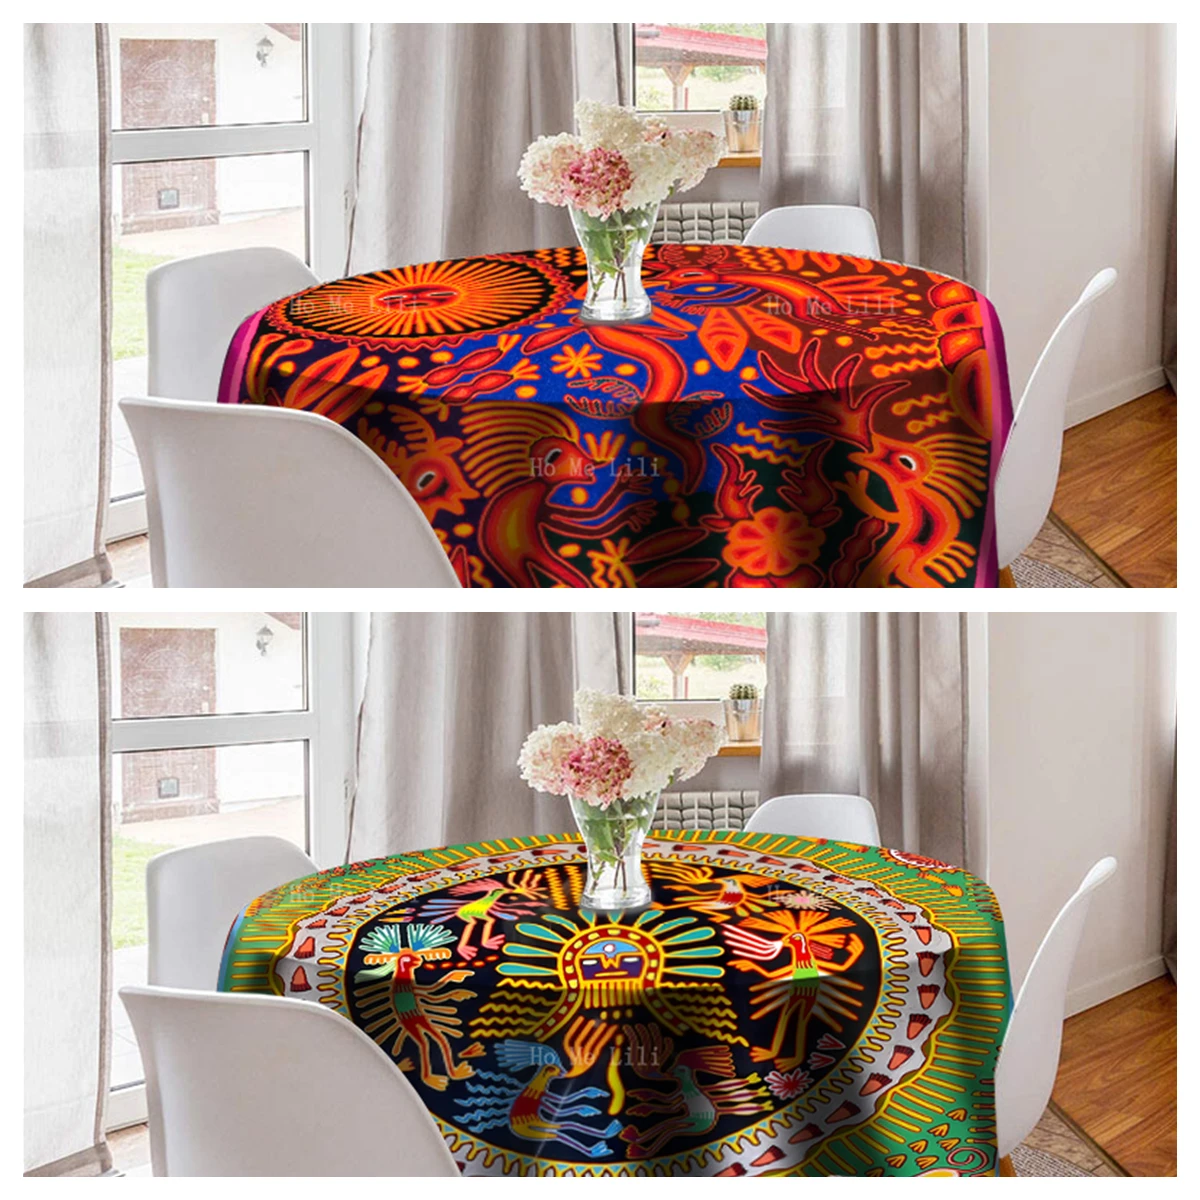 

Colorful Retro Mexican Folk Psychedelic Artwork Round Tablecloth By Ho Me Lili For Tabletop Decor